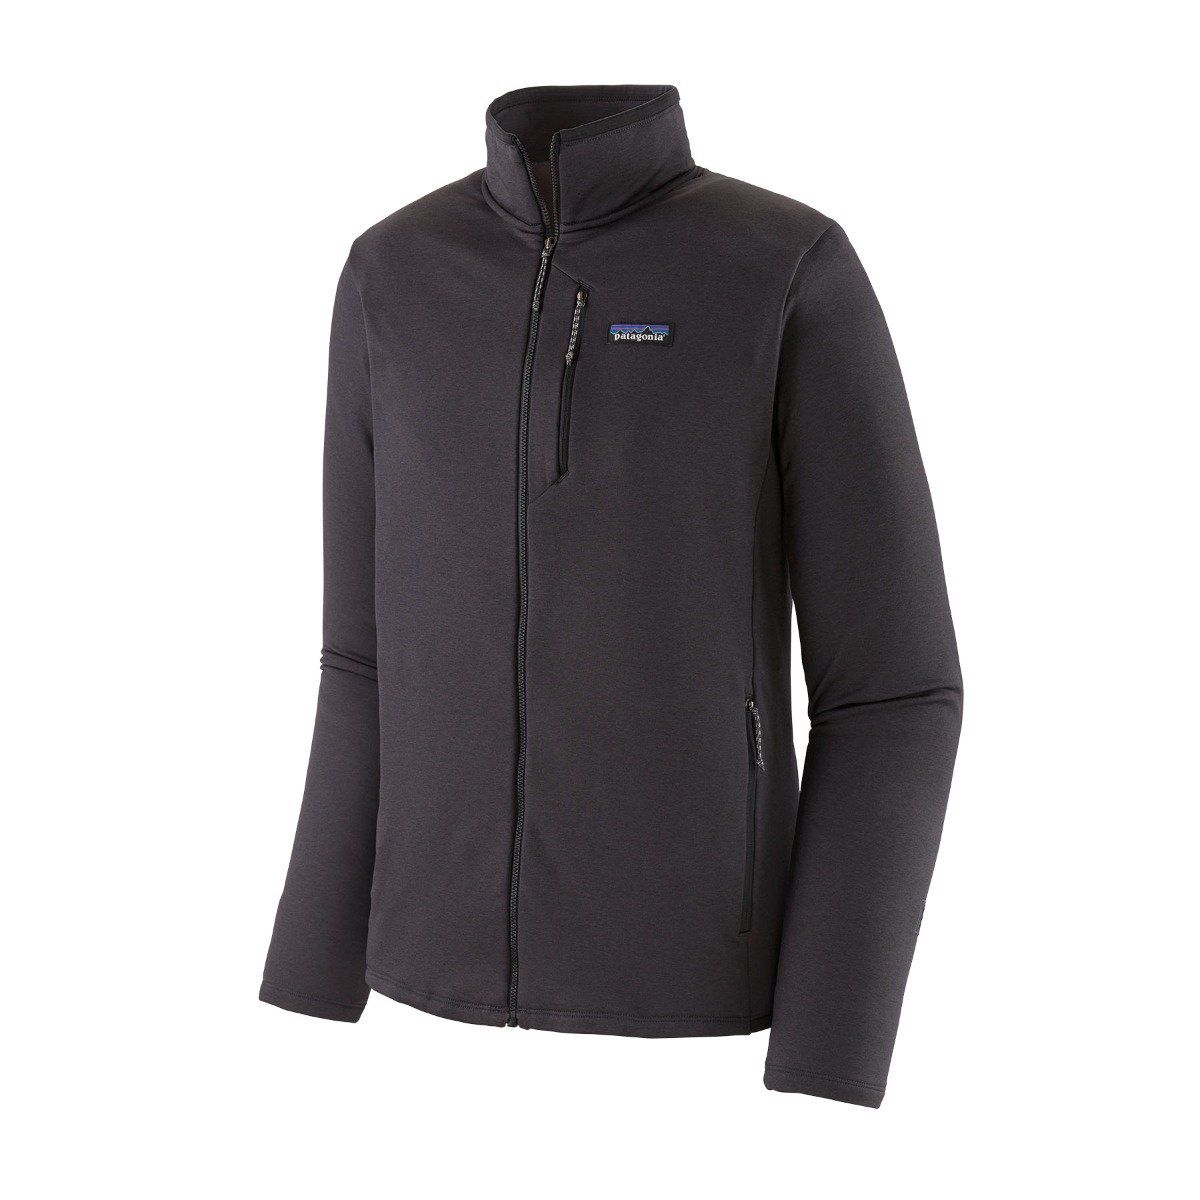 Patagonia - M's R1 Daily Jacket Light